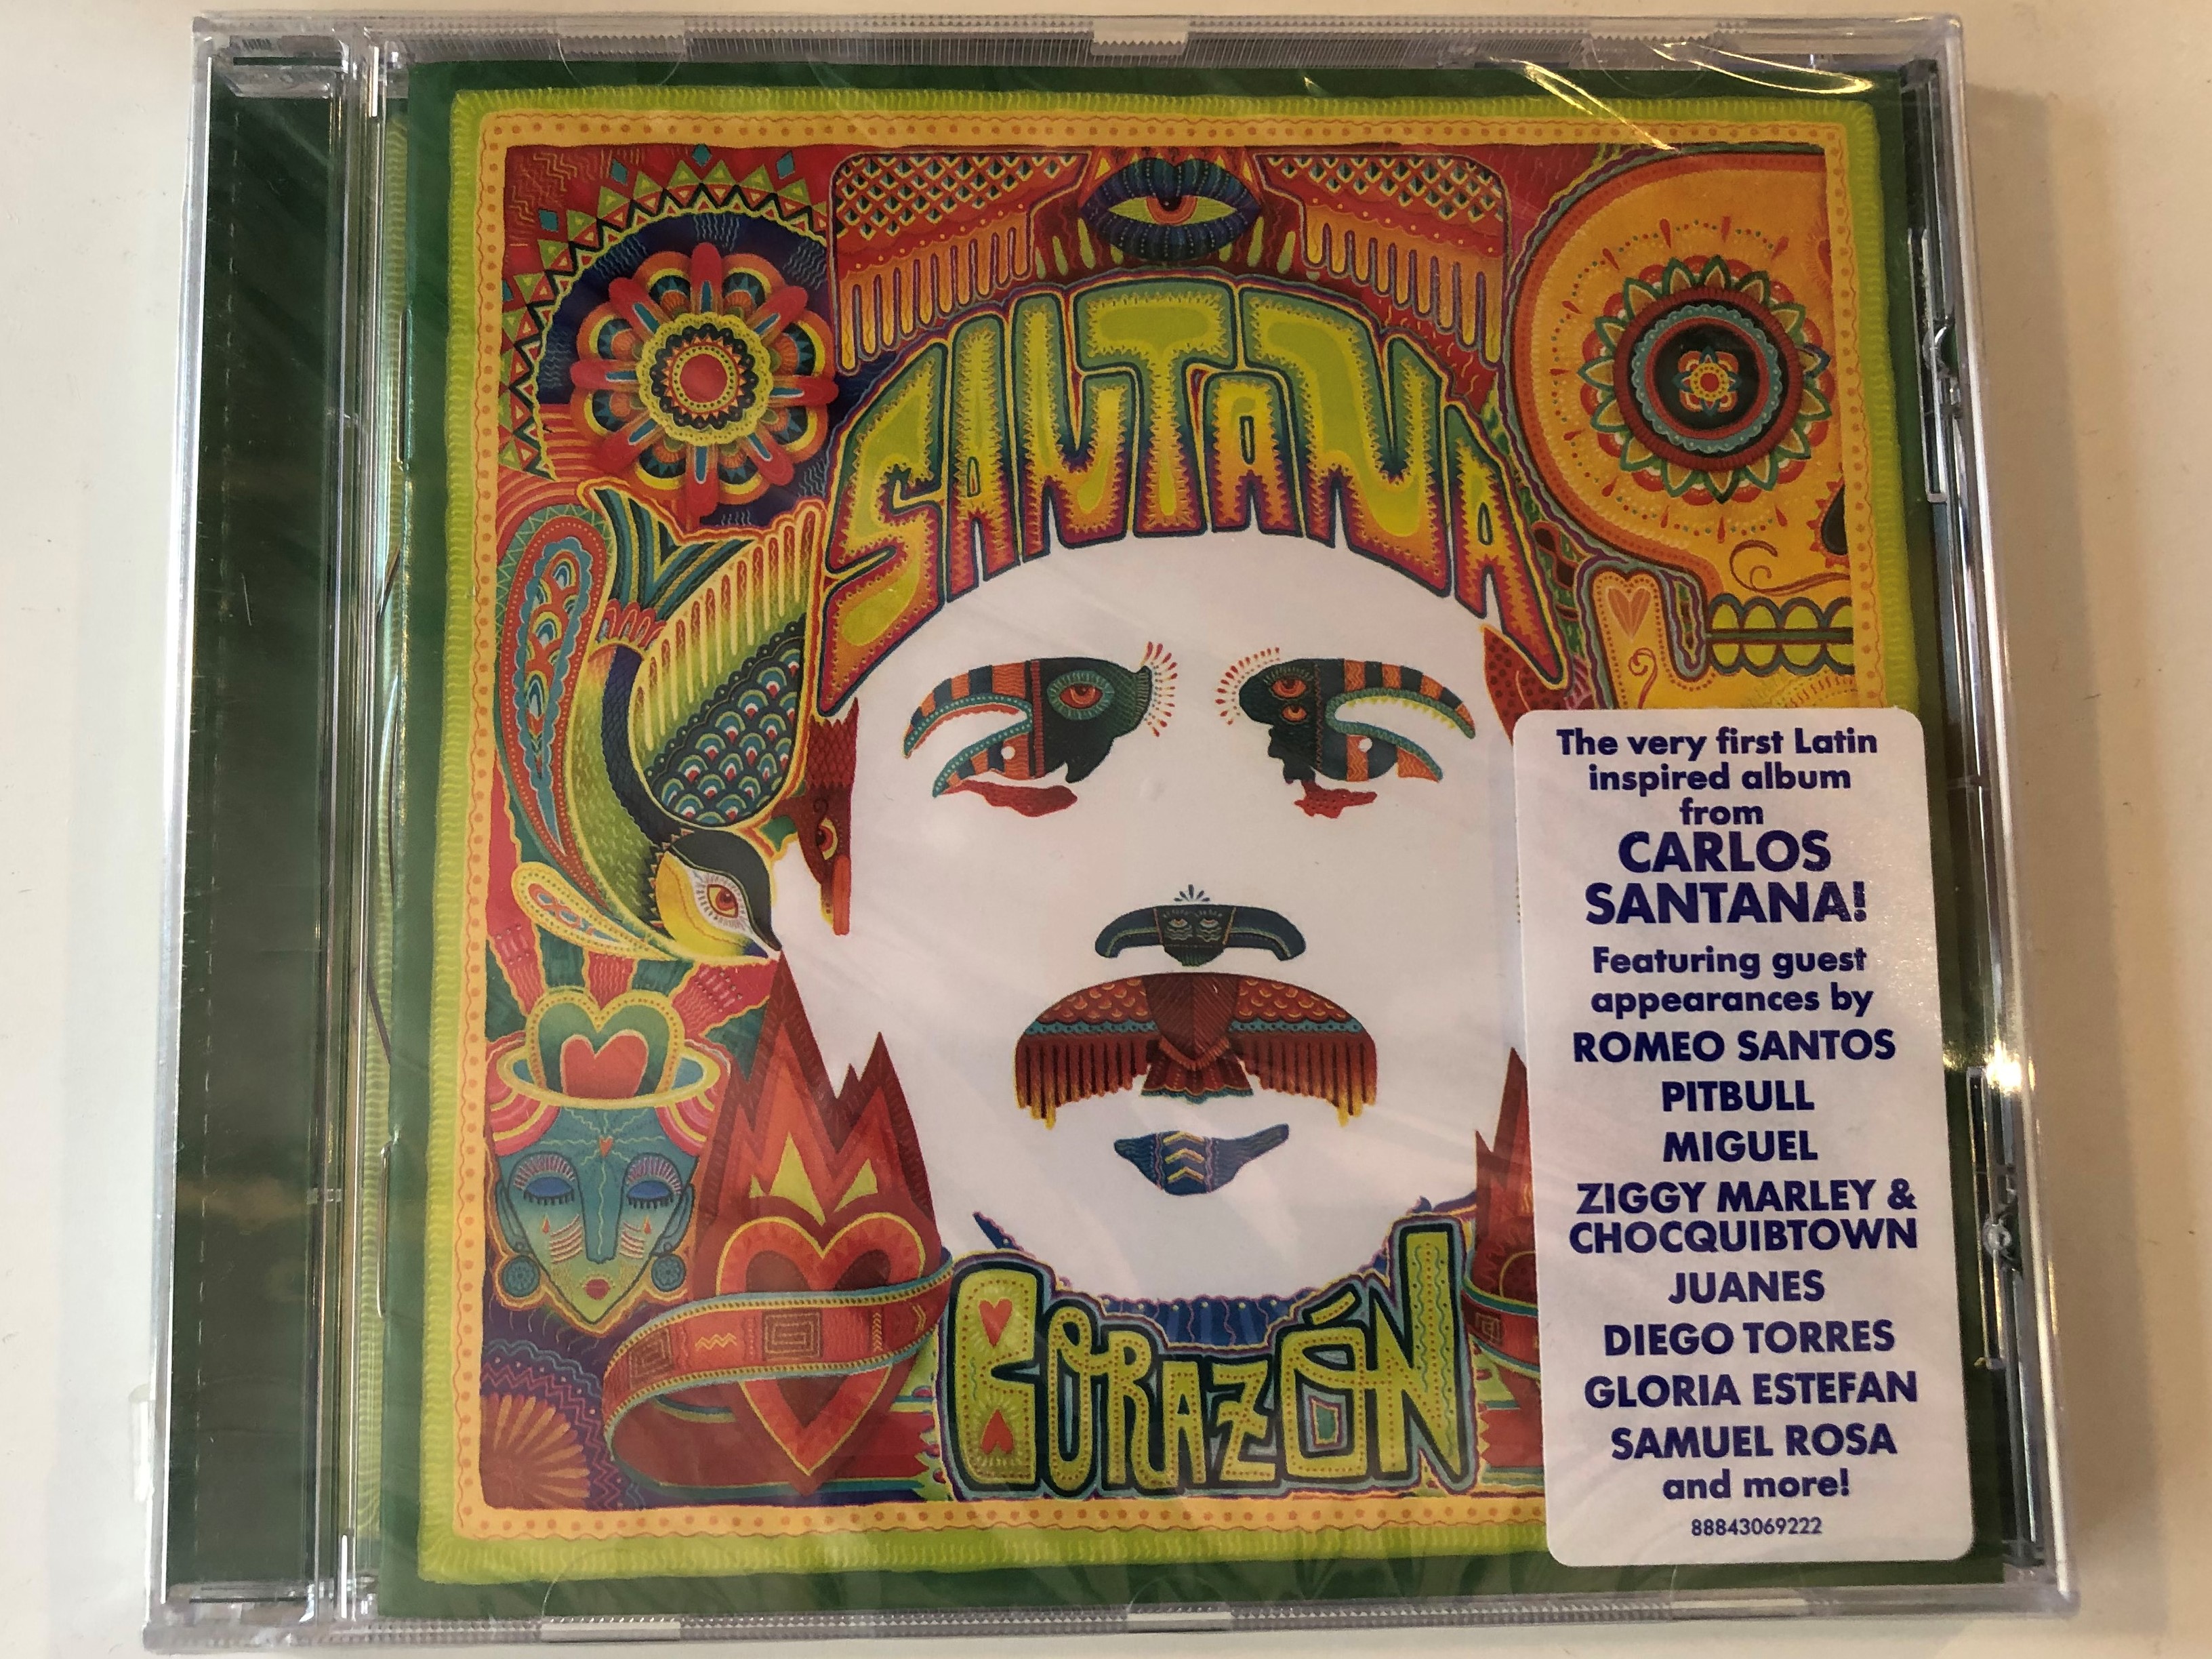 santana-coraz-n-the-very-first-latin-inspired-album-from-carlos-santana-featuring-guest-appearances-by-romeo-santos-pitbull-miguel-ziggy-marley-chocquibtown-juanes-diego-torres-glor-1-.jpg